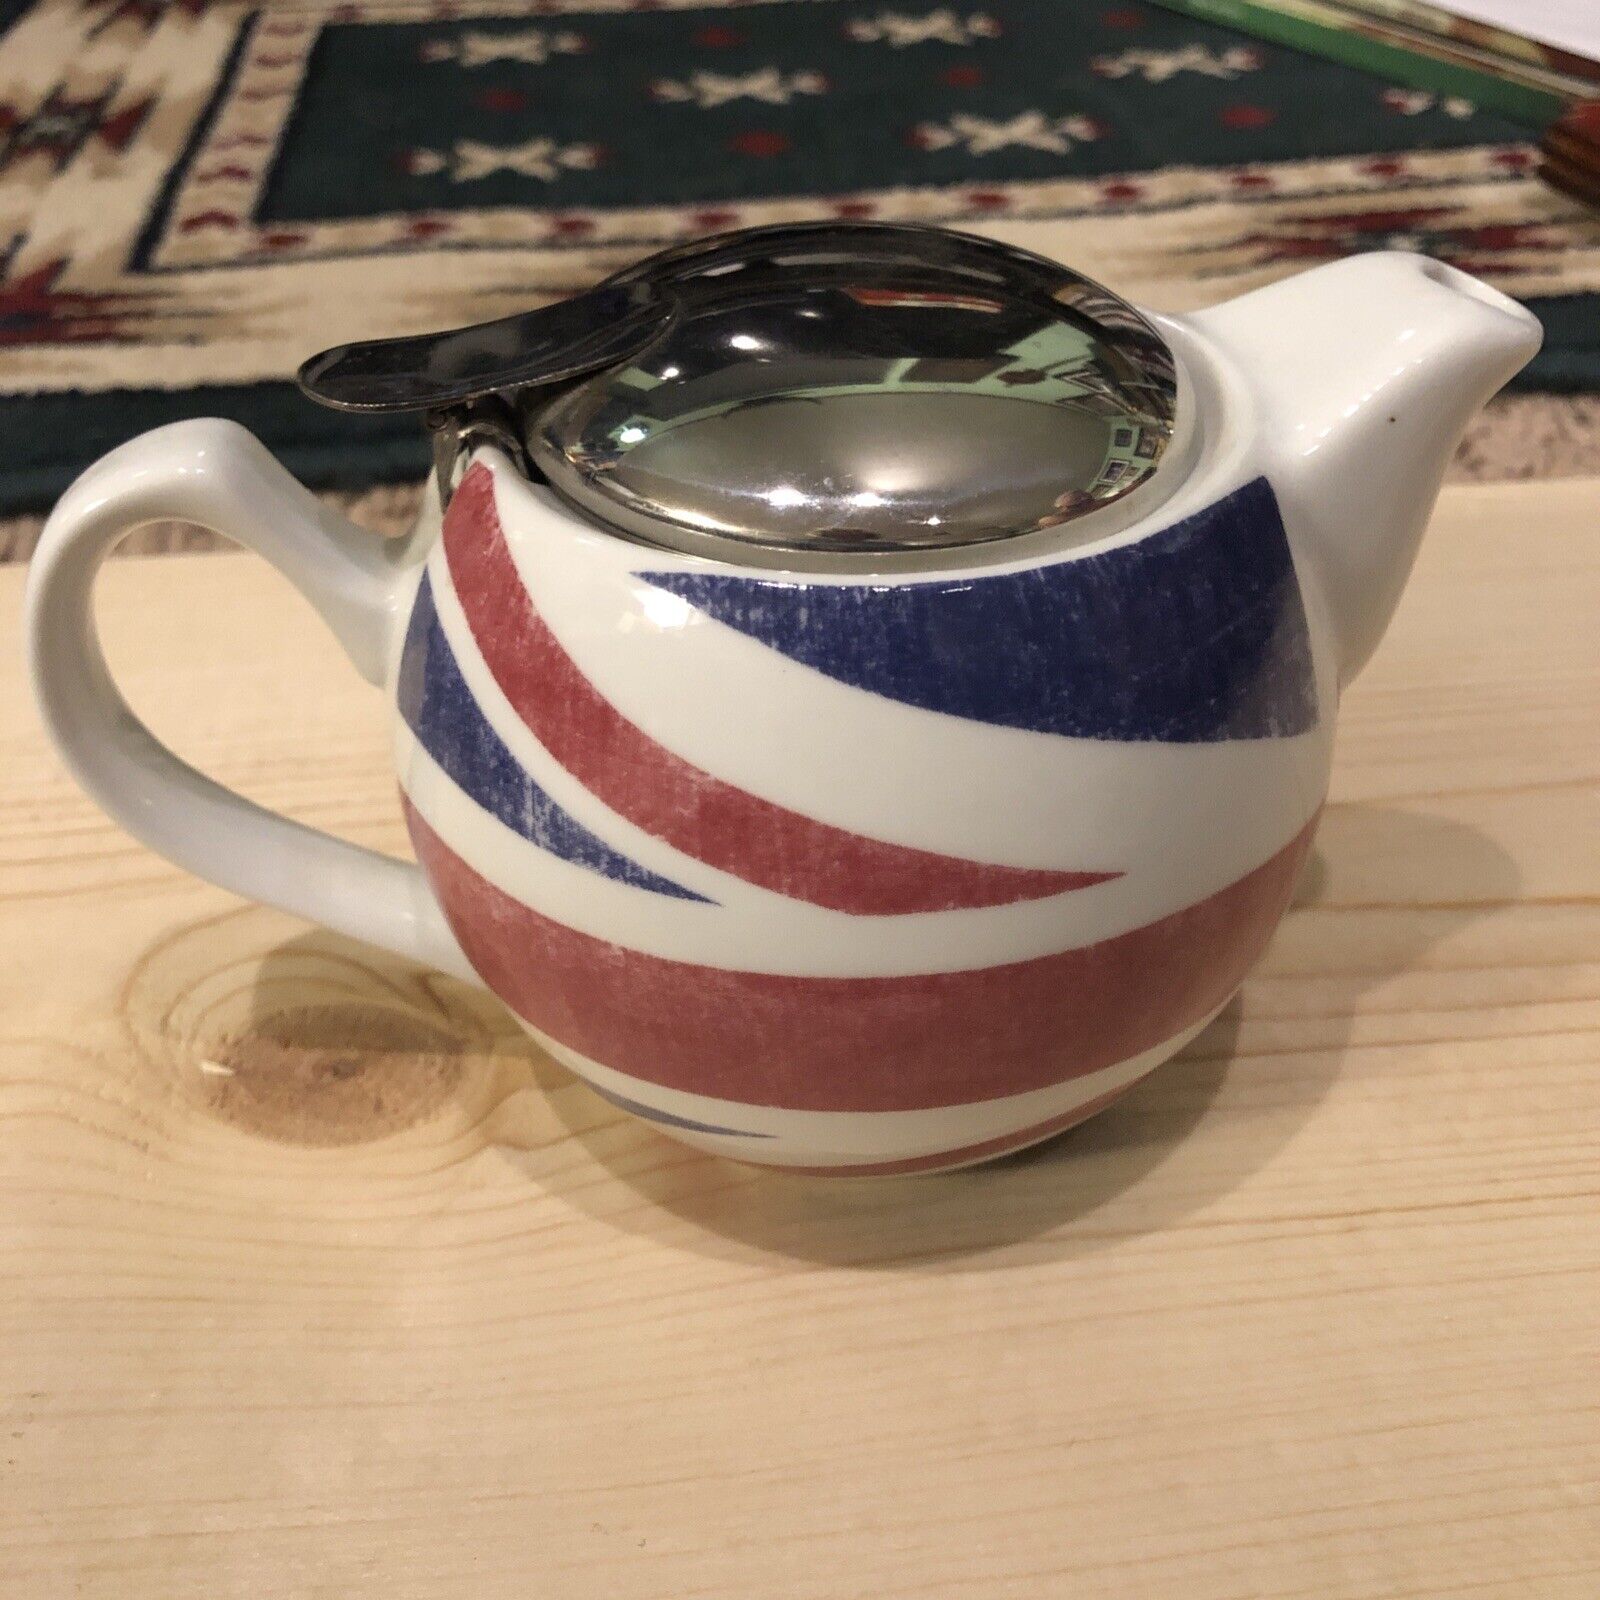 Rosanna English Tea Pot British Red White Blue Stainless Steel Basket And Lid